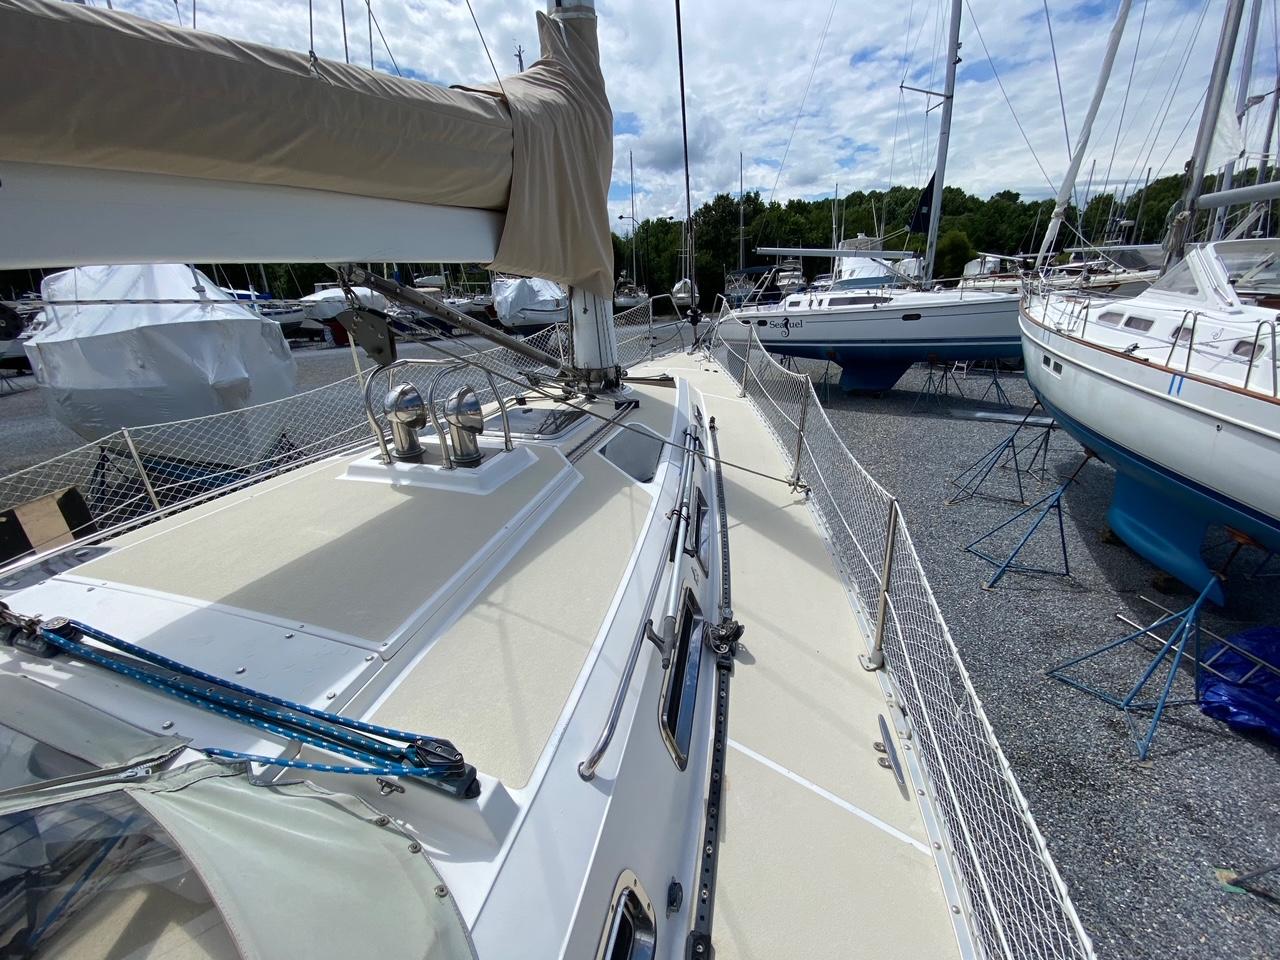 Ionia Yacht Brokers of Annapolis